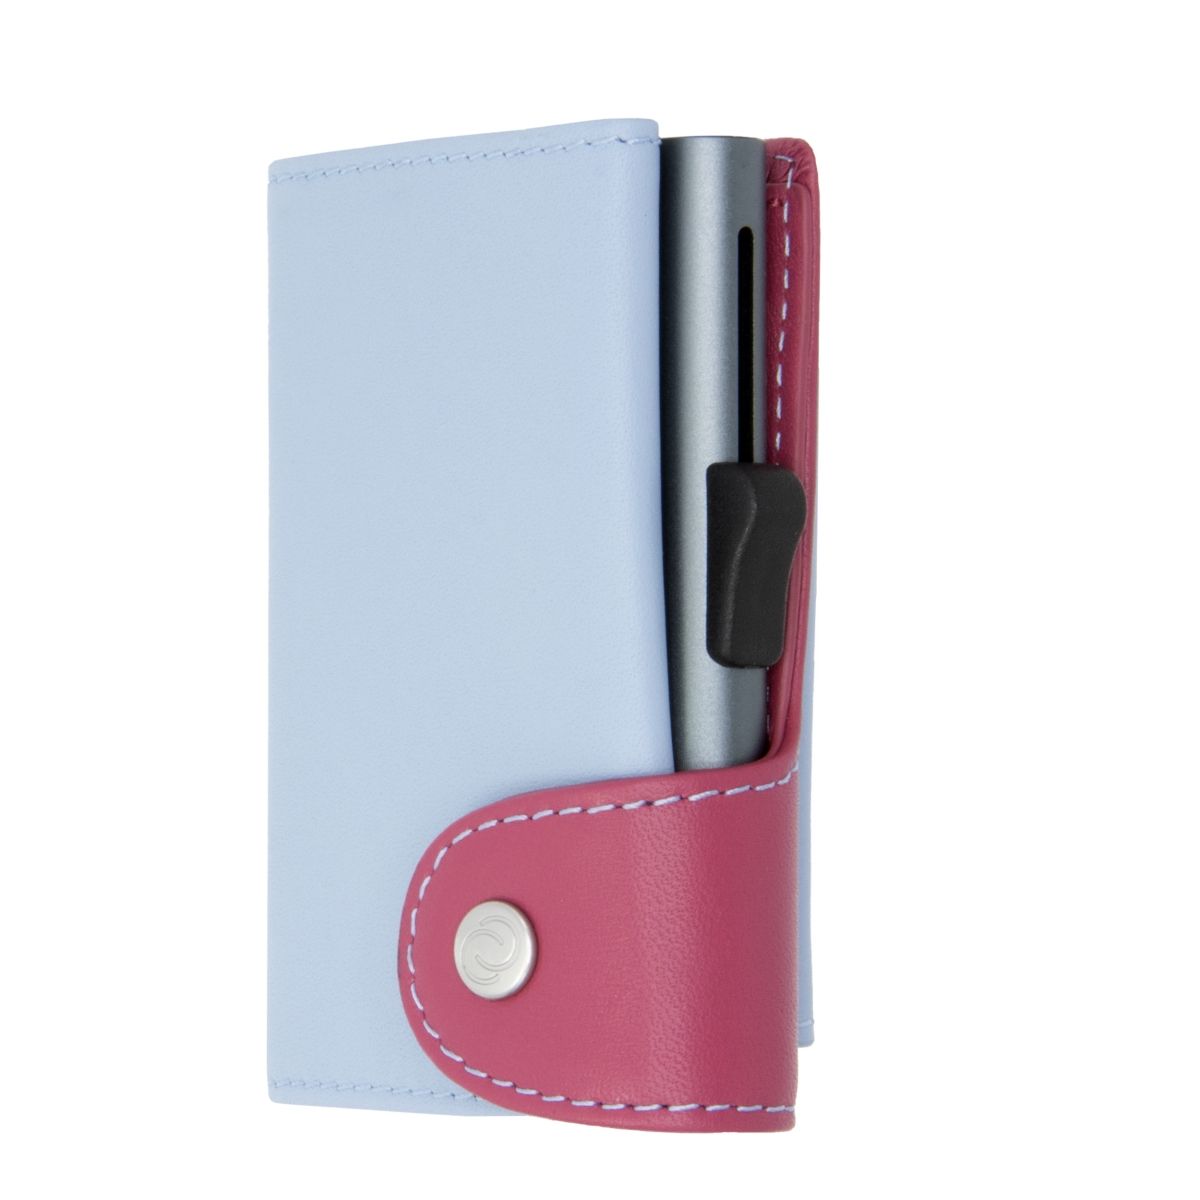 C-Secure XL Aluminum Wallet with Genuine Leather and Coins Pocket - Ice/Cherry